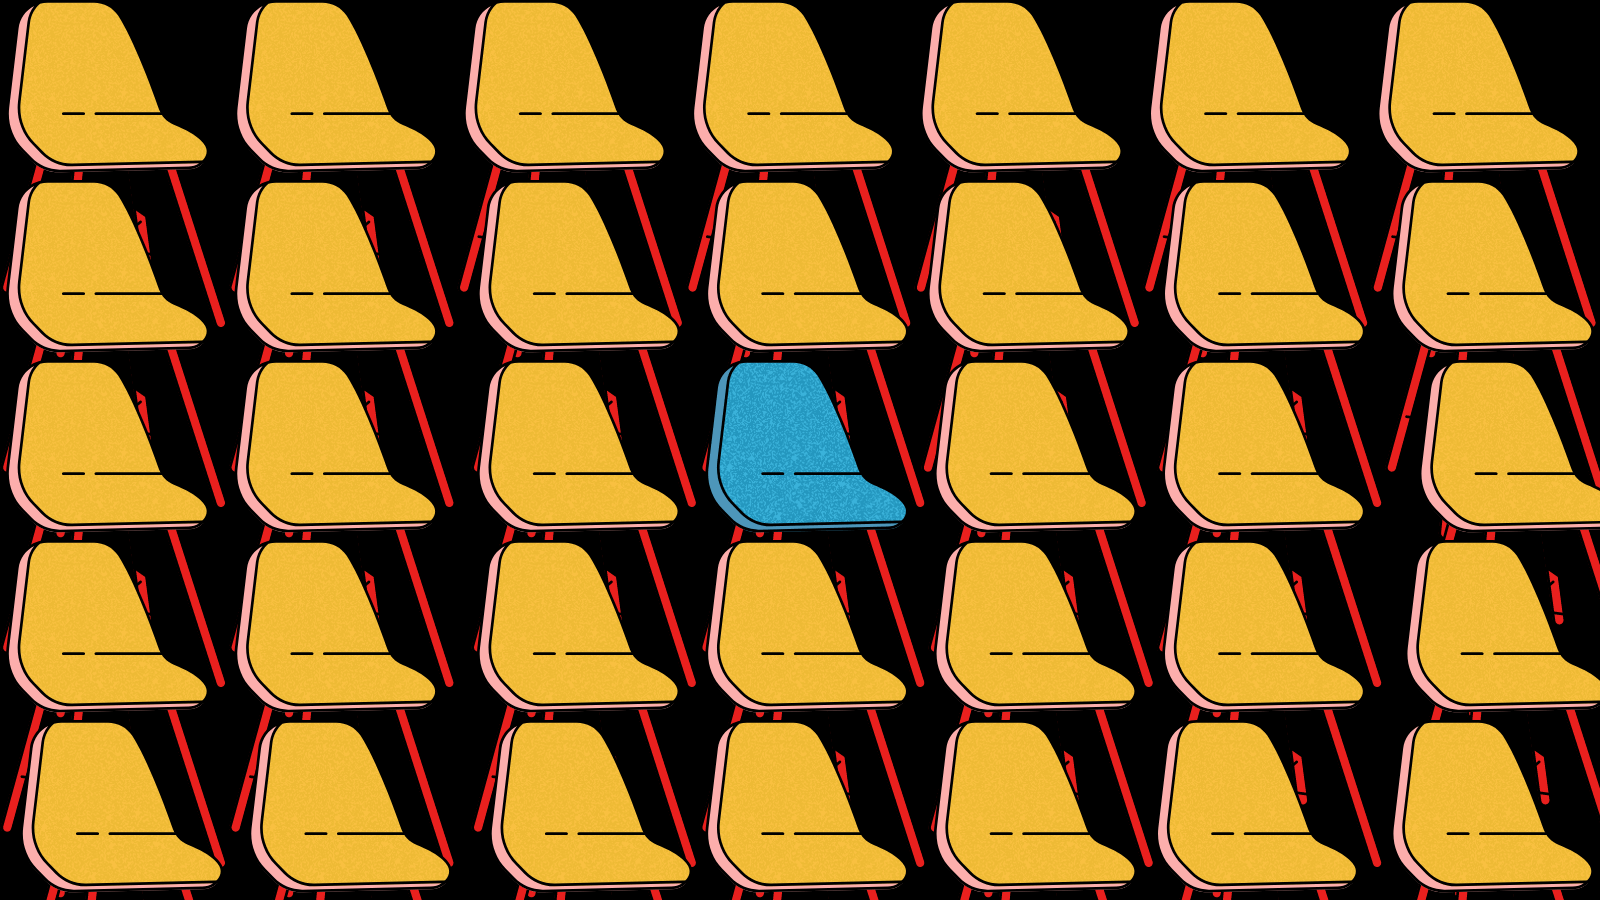 Rows of yellow chairs with one blue chair